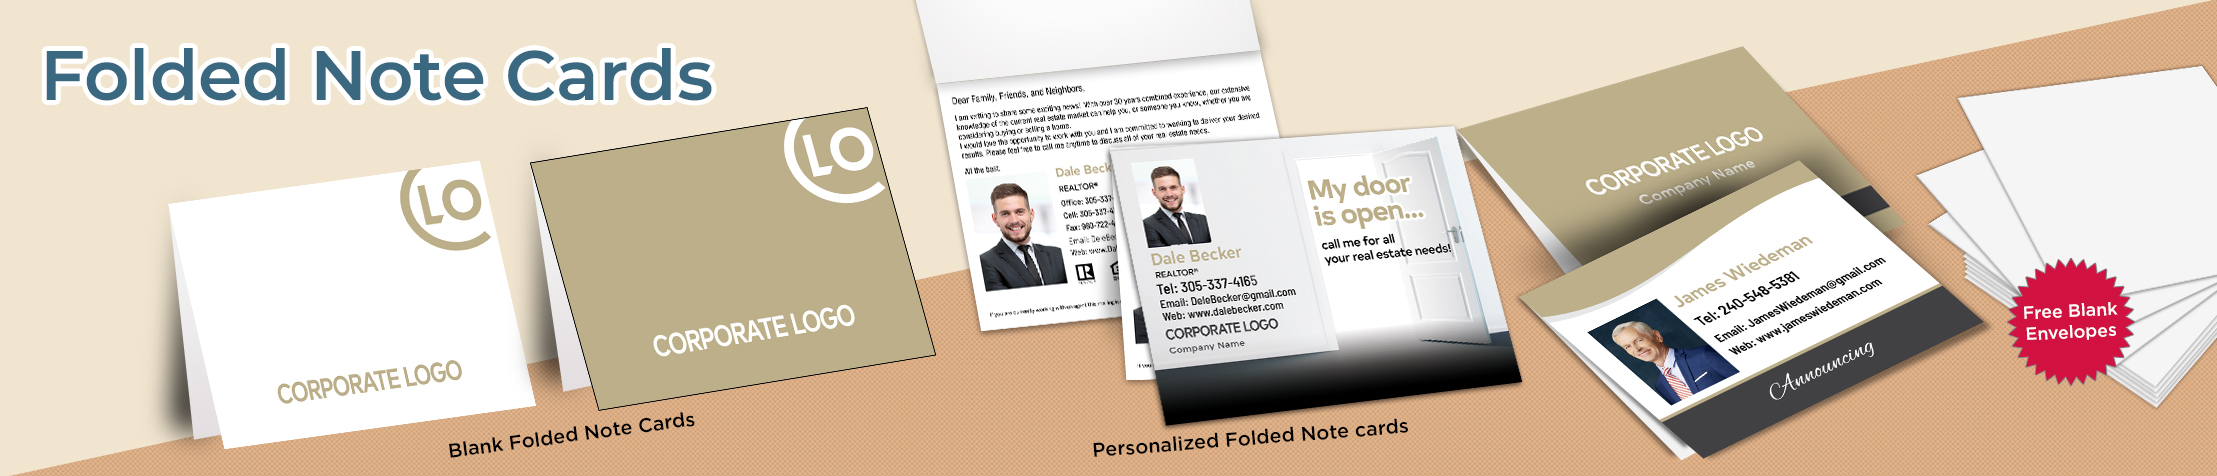 Century 21 Real Estate Postcards -  postcard templates and direct mail postcard mailing services | BestPrintBuy.com